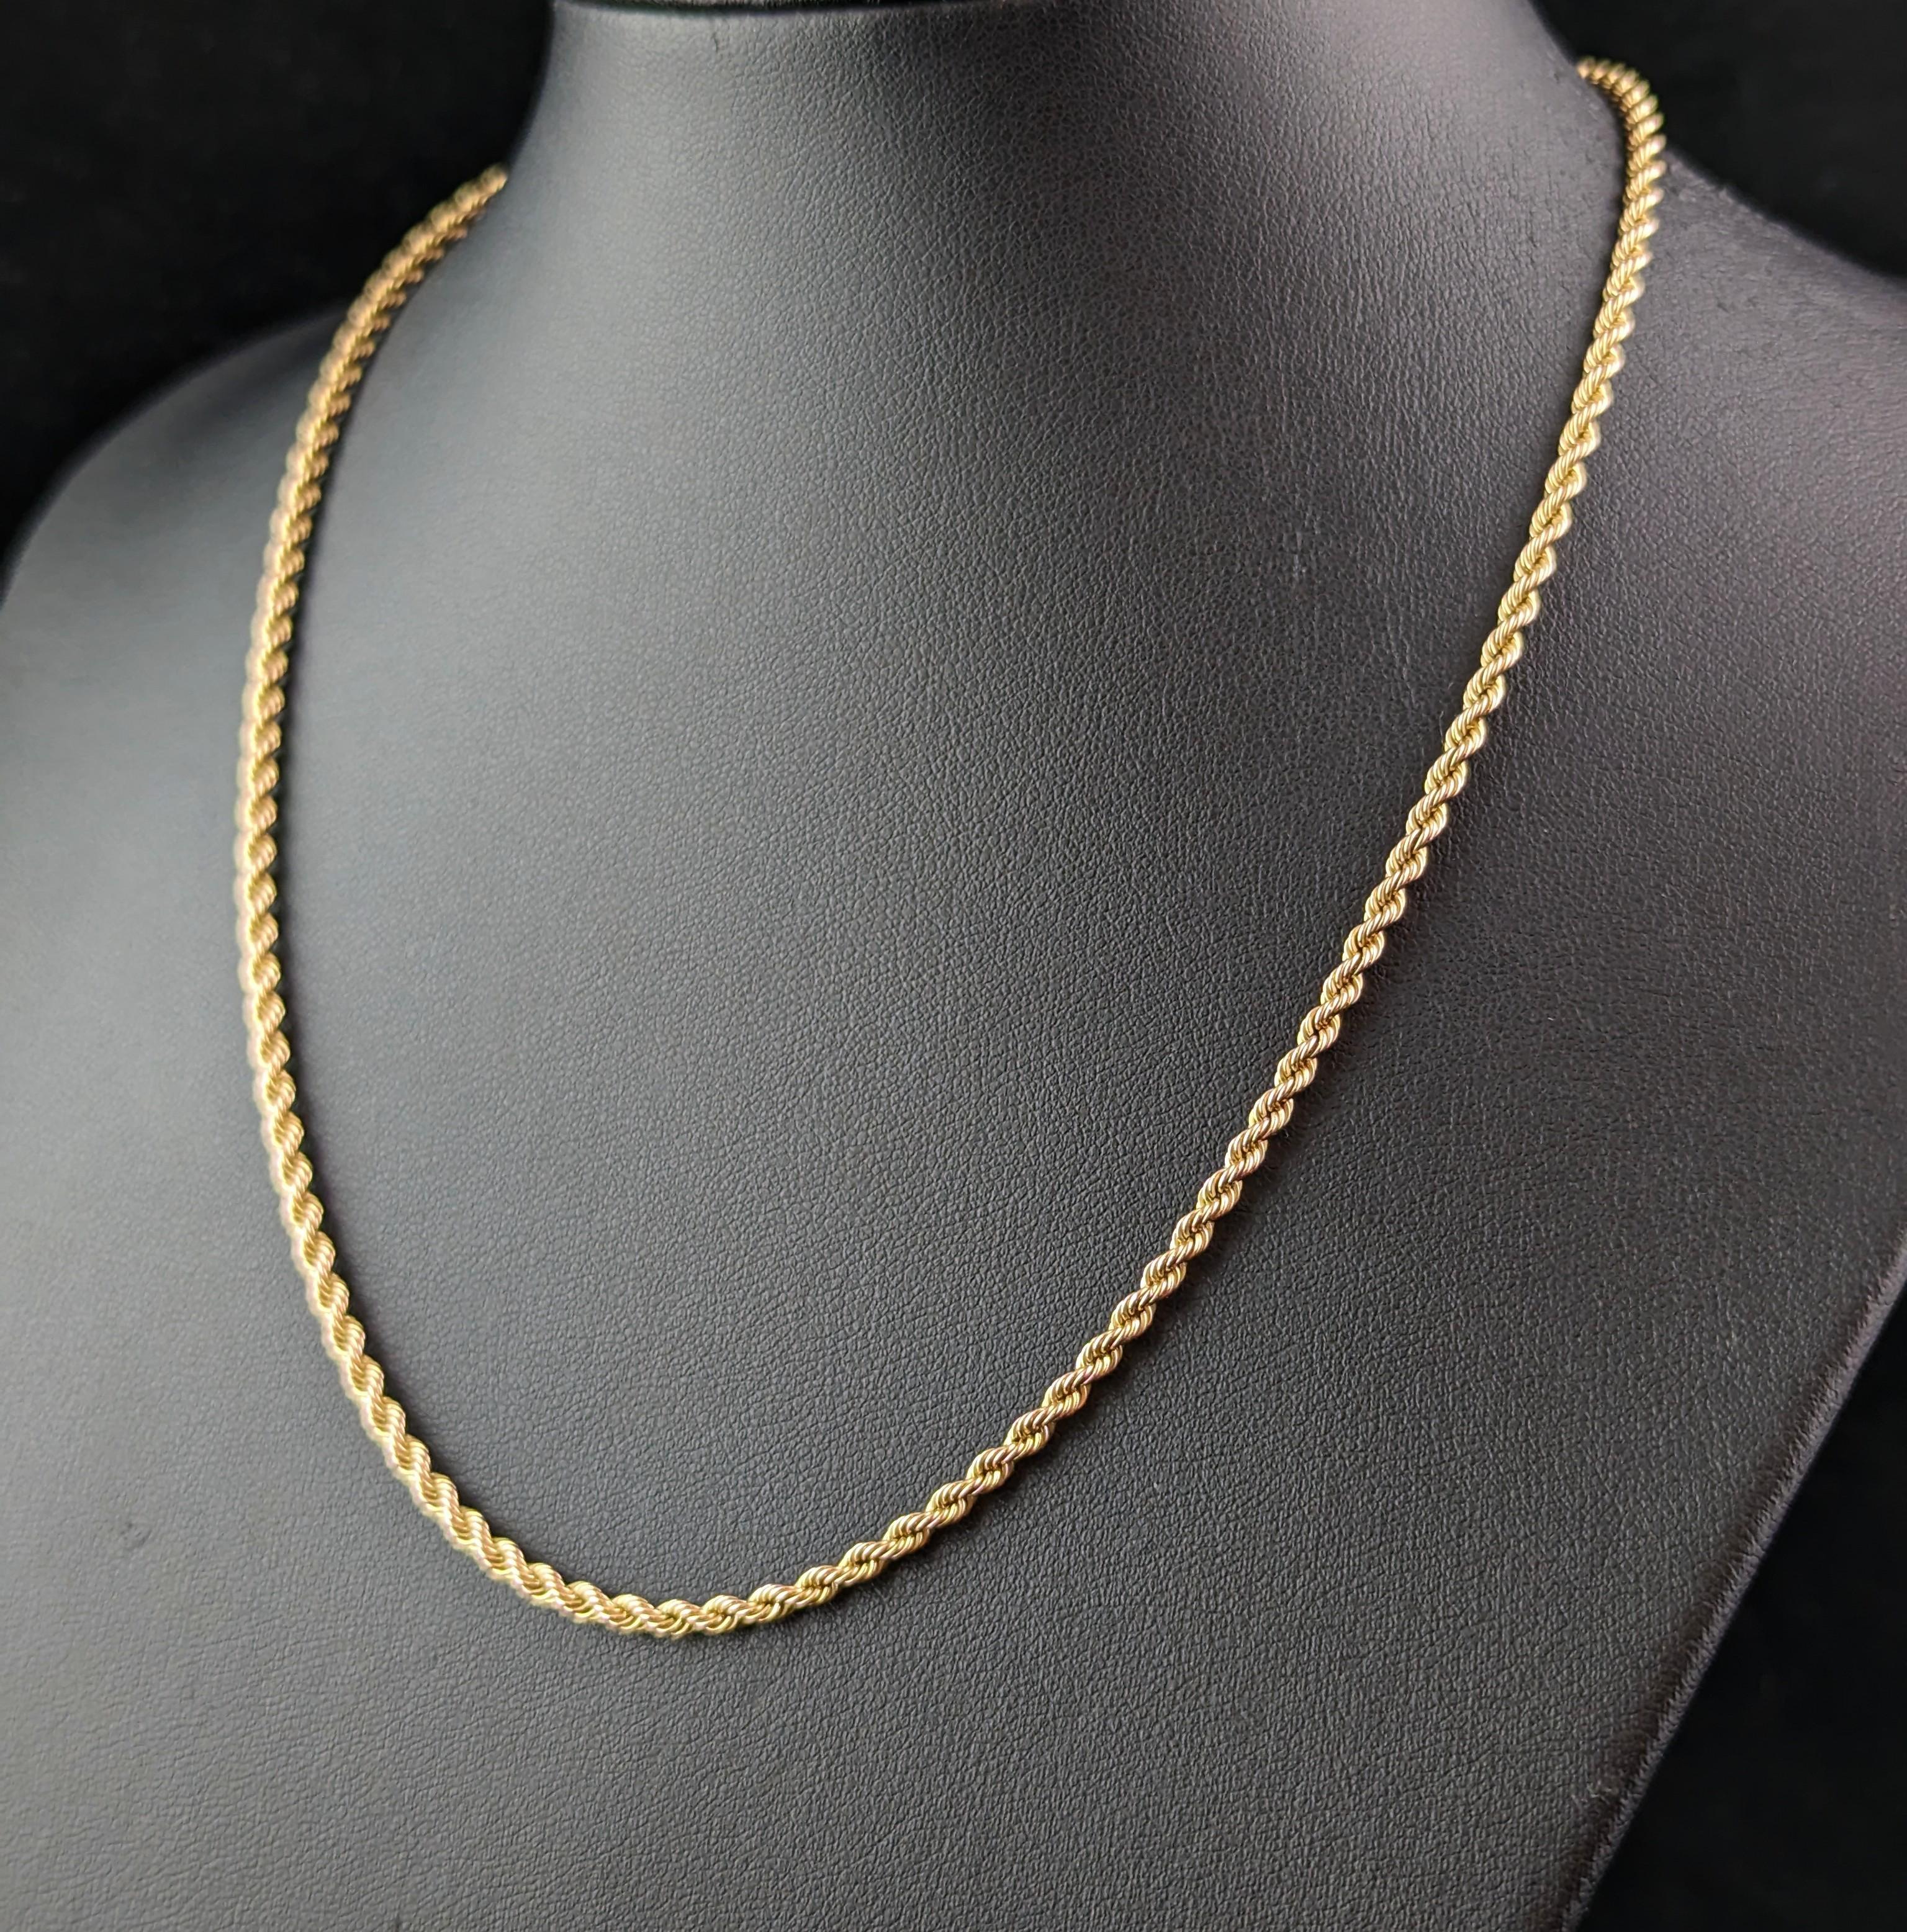 Vintage 9k yellow gold rope twist link chain necklace 2